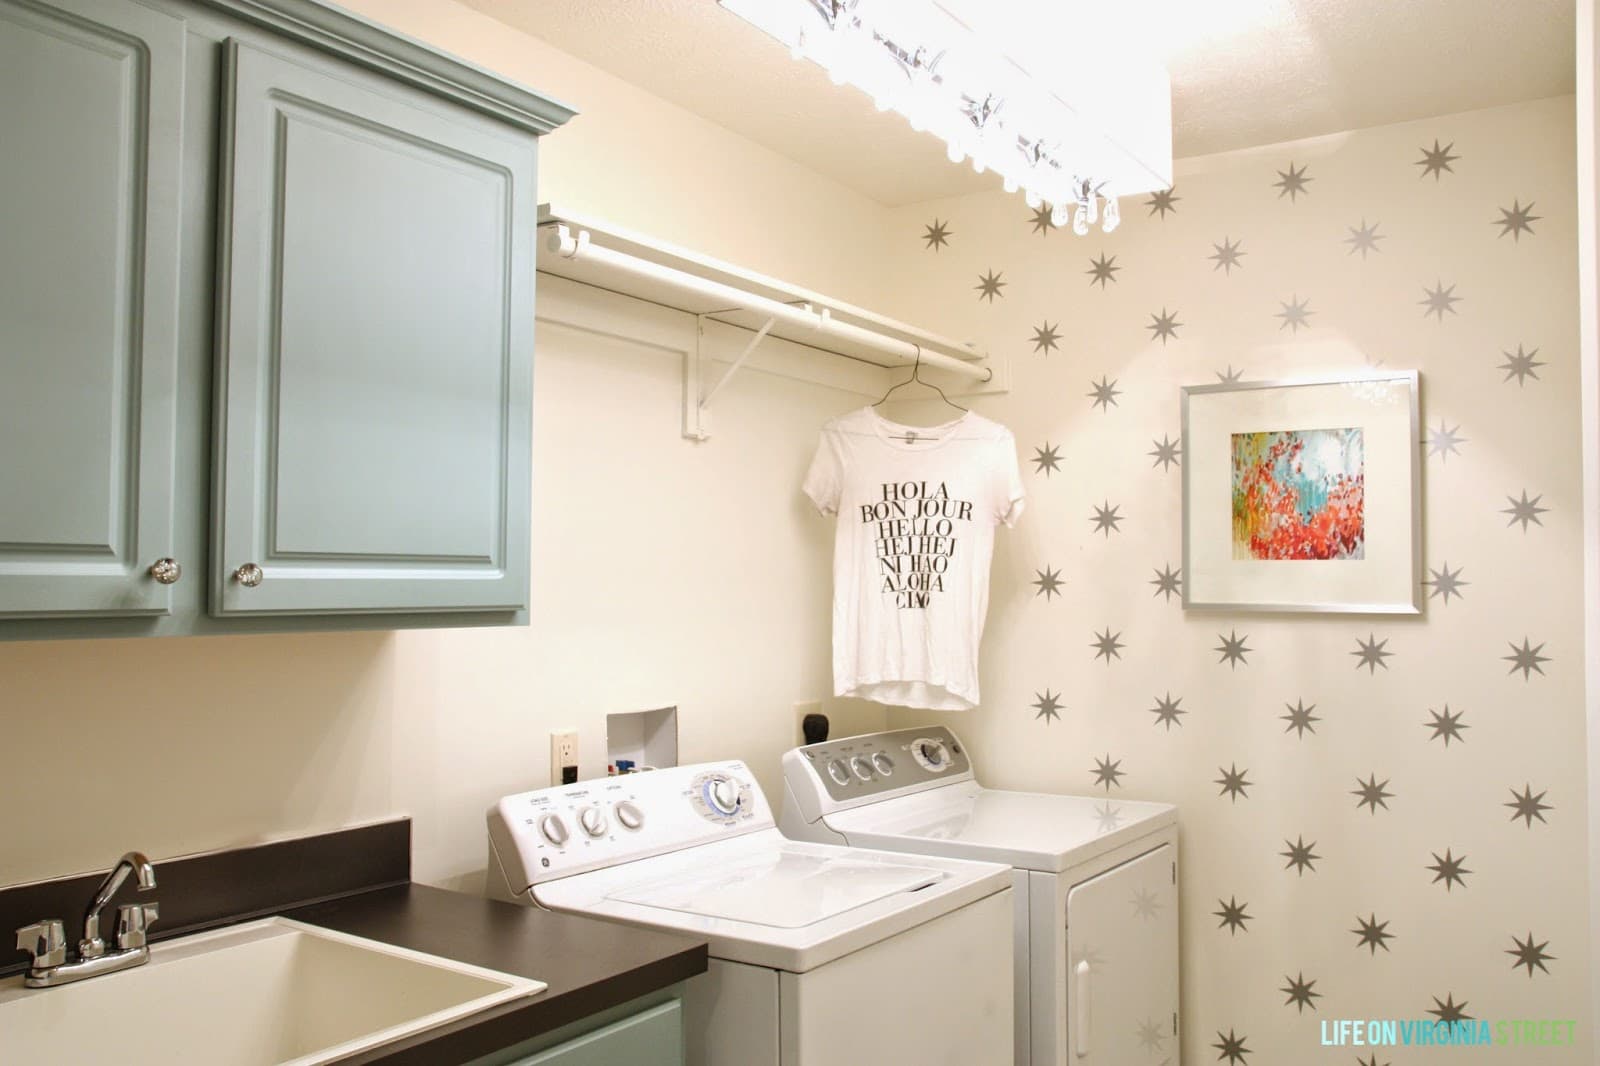 White laundry room with star decals, aqua cabinets, striped rug and colorful art.